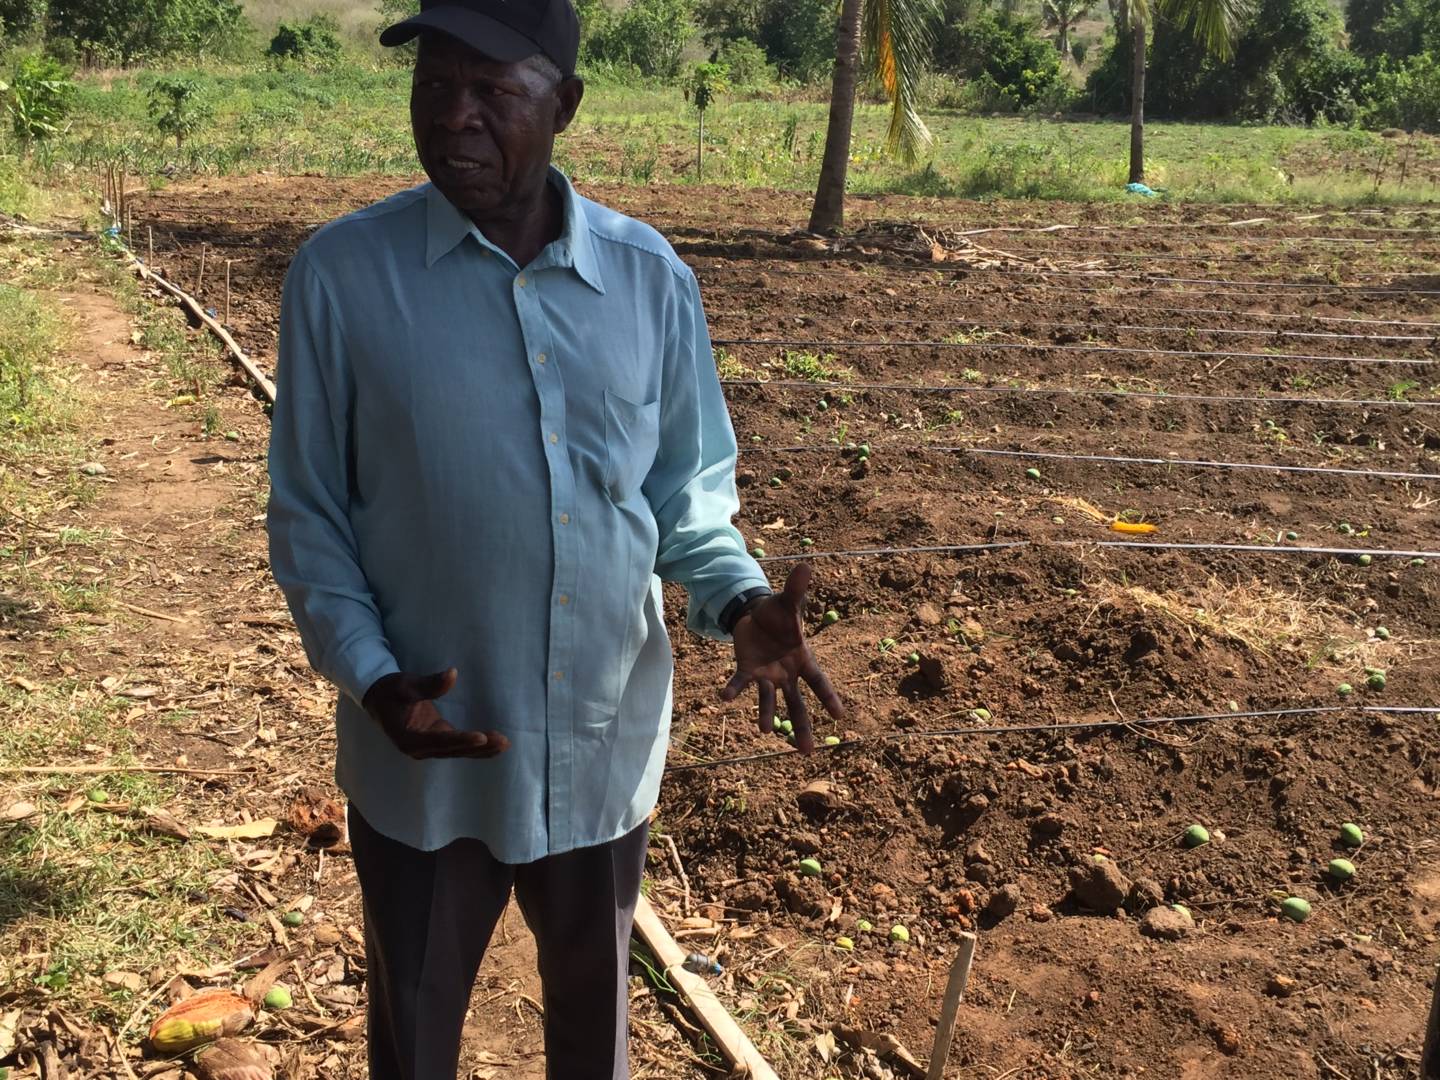 A man stands next to a plot of land that recently has been cultivated.